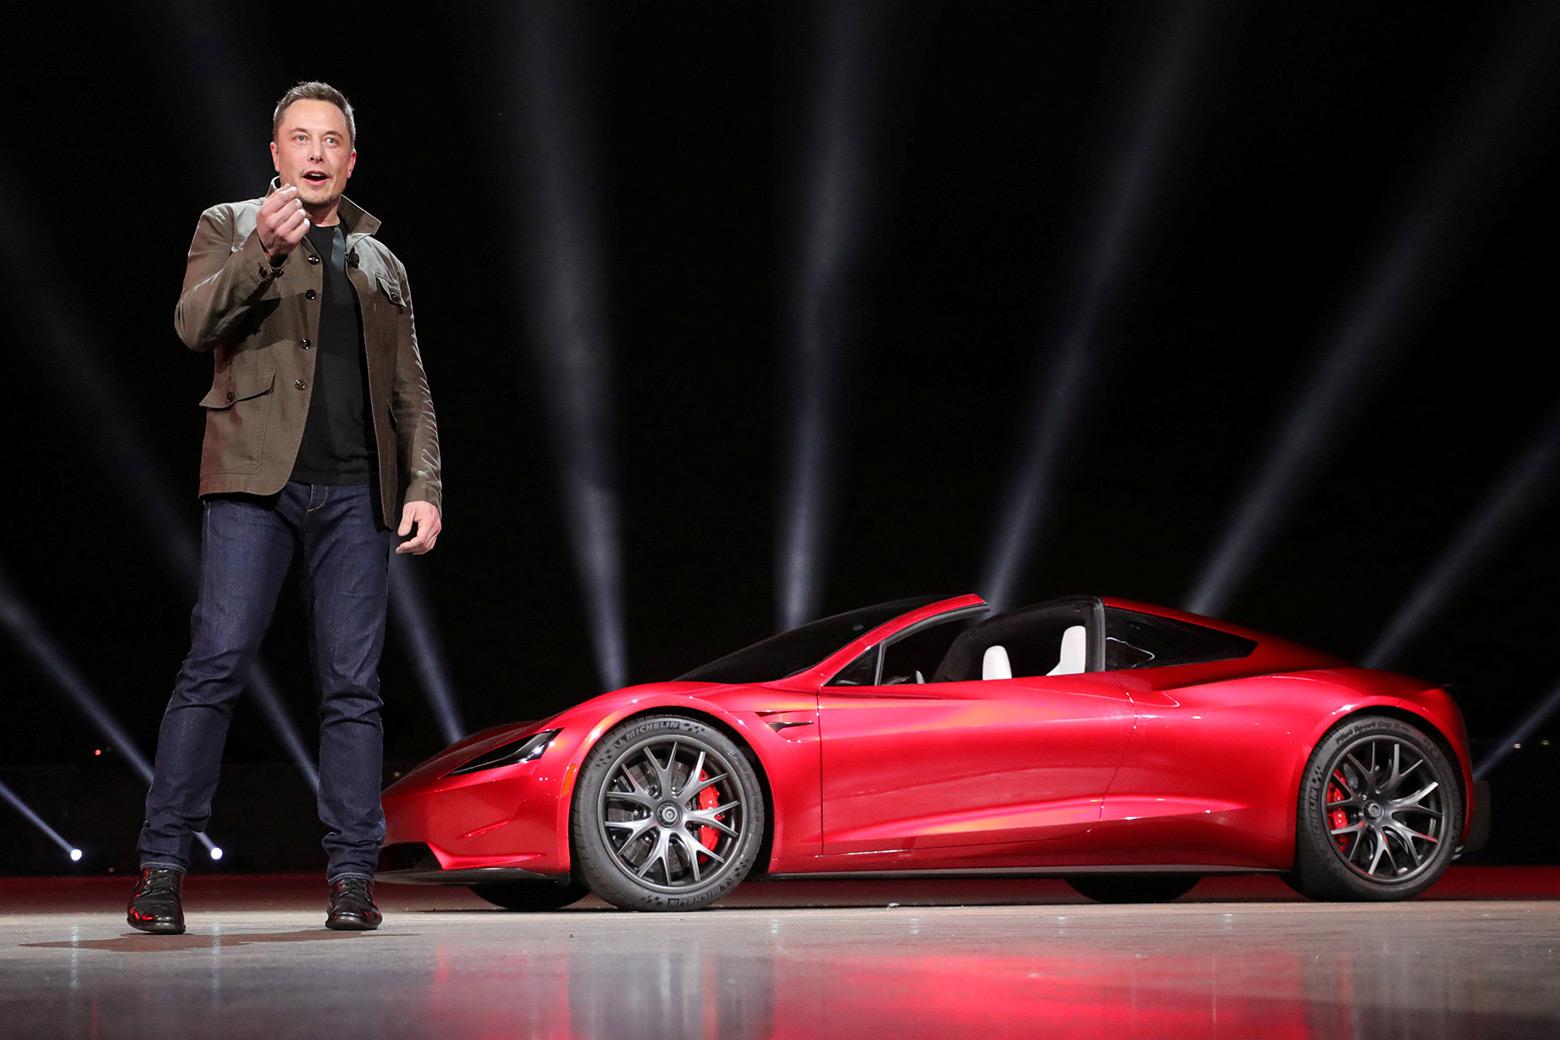 Tesla CEO Elon Musk unveils the Roadster 2 during a presentation in Hawthorne, California, on Nov. 16.